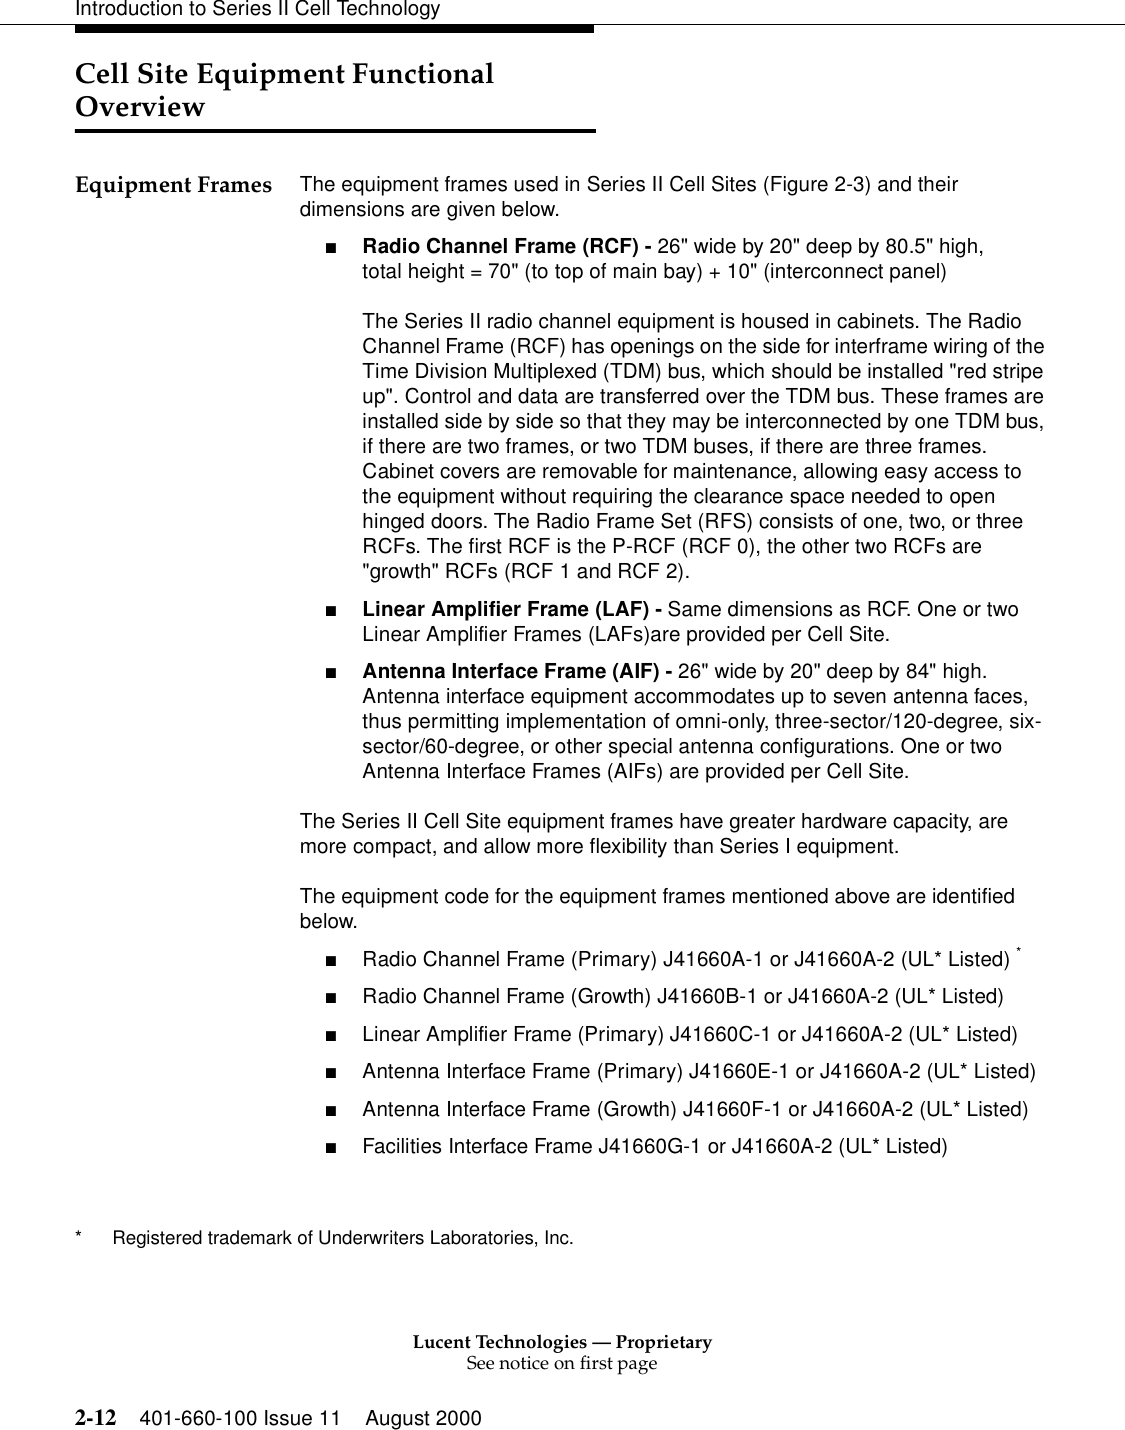 Lucent Technologies — ProprietarySee notice on first page2-12 401-660-100 Issue 11 August 2000Introduction to Series II Cell TechnologyCell Site Equipment Functional OverviewEquipment Frames The equipment frames used in Series II Cell Sites (Figure 2-3) and their dimensions are given below.■Radio Channel Frame (RCF) - 26&quot; wide by 20&quot; deep by 80.5&quot; high, total height = 70&quot; (to top of main bay) + 10&quot; (interconnect panel) The Series II radio channel equipment is housed in cabinets. The Radio Channel Frame (RCF) has openings on the side for interframe wiring of the Time Division Multiplexed (TDM) bus, which should be installed &quot;red stripe up&quot;. Control and data are transferred over the TDM bus. These frames are installed side by side so that they may be interconnected by one TDM bus, if there are two frames, or two TDM buses, if there are three frames. Cabinet covers are removable for maintenance, allowing easy access to the equipment without requiring the clearance space needed to open hinged doors. The Radio Frame Set (RFS) consists of one, two, or three RCFs. The first RCF is the P-RCF (RCF 0), the other two RCFs are &quot;growth&quot; RCFs (RCF 1 and RCF 2).■Linear Amplifier Frame (LAF) - Same dimensions as RCF. One or two Linear Amplifier Frames (LAFs)are provided per Cell Site.■Antenna Interface Frame (AIF) - 26&quot; wide by 20&quot; deep by 84&quot; high. Antenna interface equipment accommodates up to seven antenna faces, thus permitting implementation of omni-only, three-sector/120-degree, six-sector/60-degree, or other special antenna configurations. One or two Antenna Interface Frames (AIFs) are provided per Cell Site.The Series II Cell Site equipment frames have greater hardware capacity, are more compact, and allow more flexibility than Series I equipment.The equipment code for the equipment frames mentioned above are identified below.■Radio Channel Frame (Primary) J41660A-1 or J41660A-2 (UL* Listed) *■Radio Channel Frame (Growth) J41660B-1 or J41660A-2 (UL* Listed)■Linear Amplifier Frame (Primary) J41660C-1 or J41660A-2 (UL* Listed)■Antenna Interface Frame (Primary) J41660E-1 or J41660A-2 (UL* Listed)■Antenna Interface Frame (Growth) J41660F-1 or J41660A-2 (UL* Listed)■Facilities Interface Frame J41660G-1 or J41660A-2 (UL* Listed)* Registered trademark of Underwriters Laboratories, Inc. 